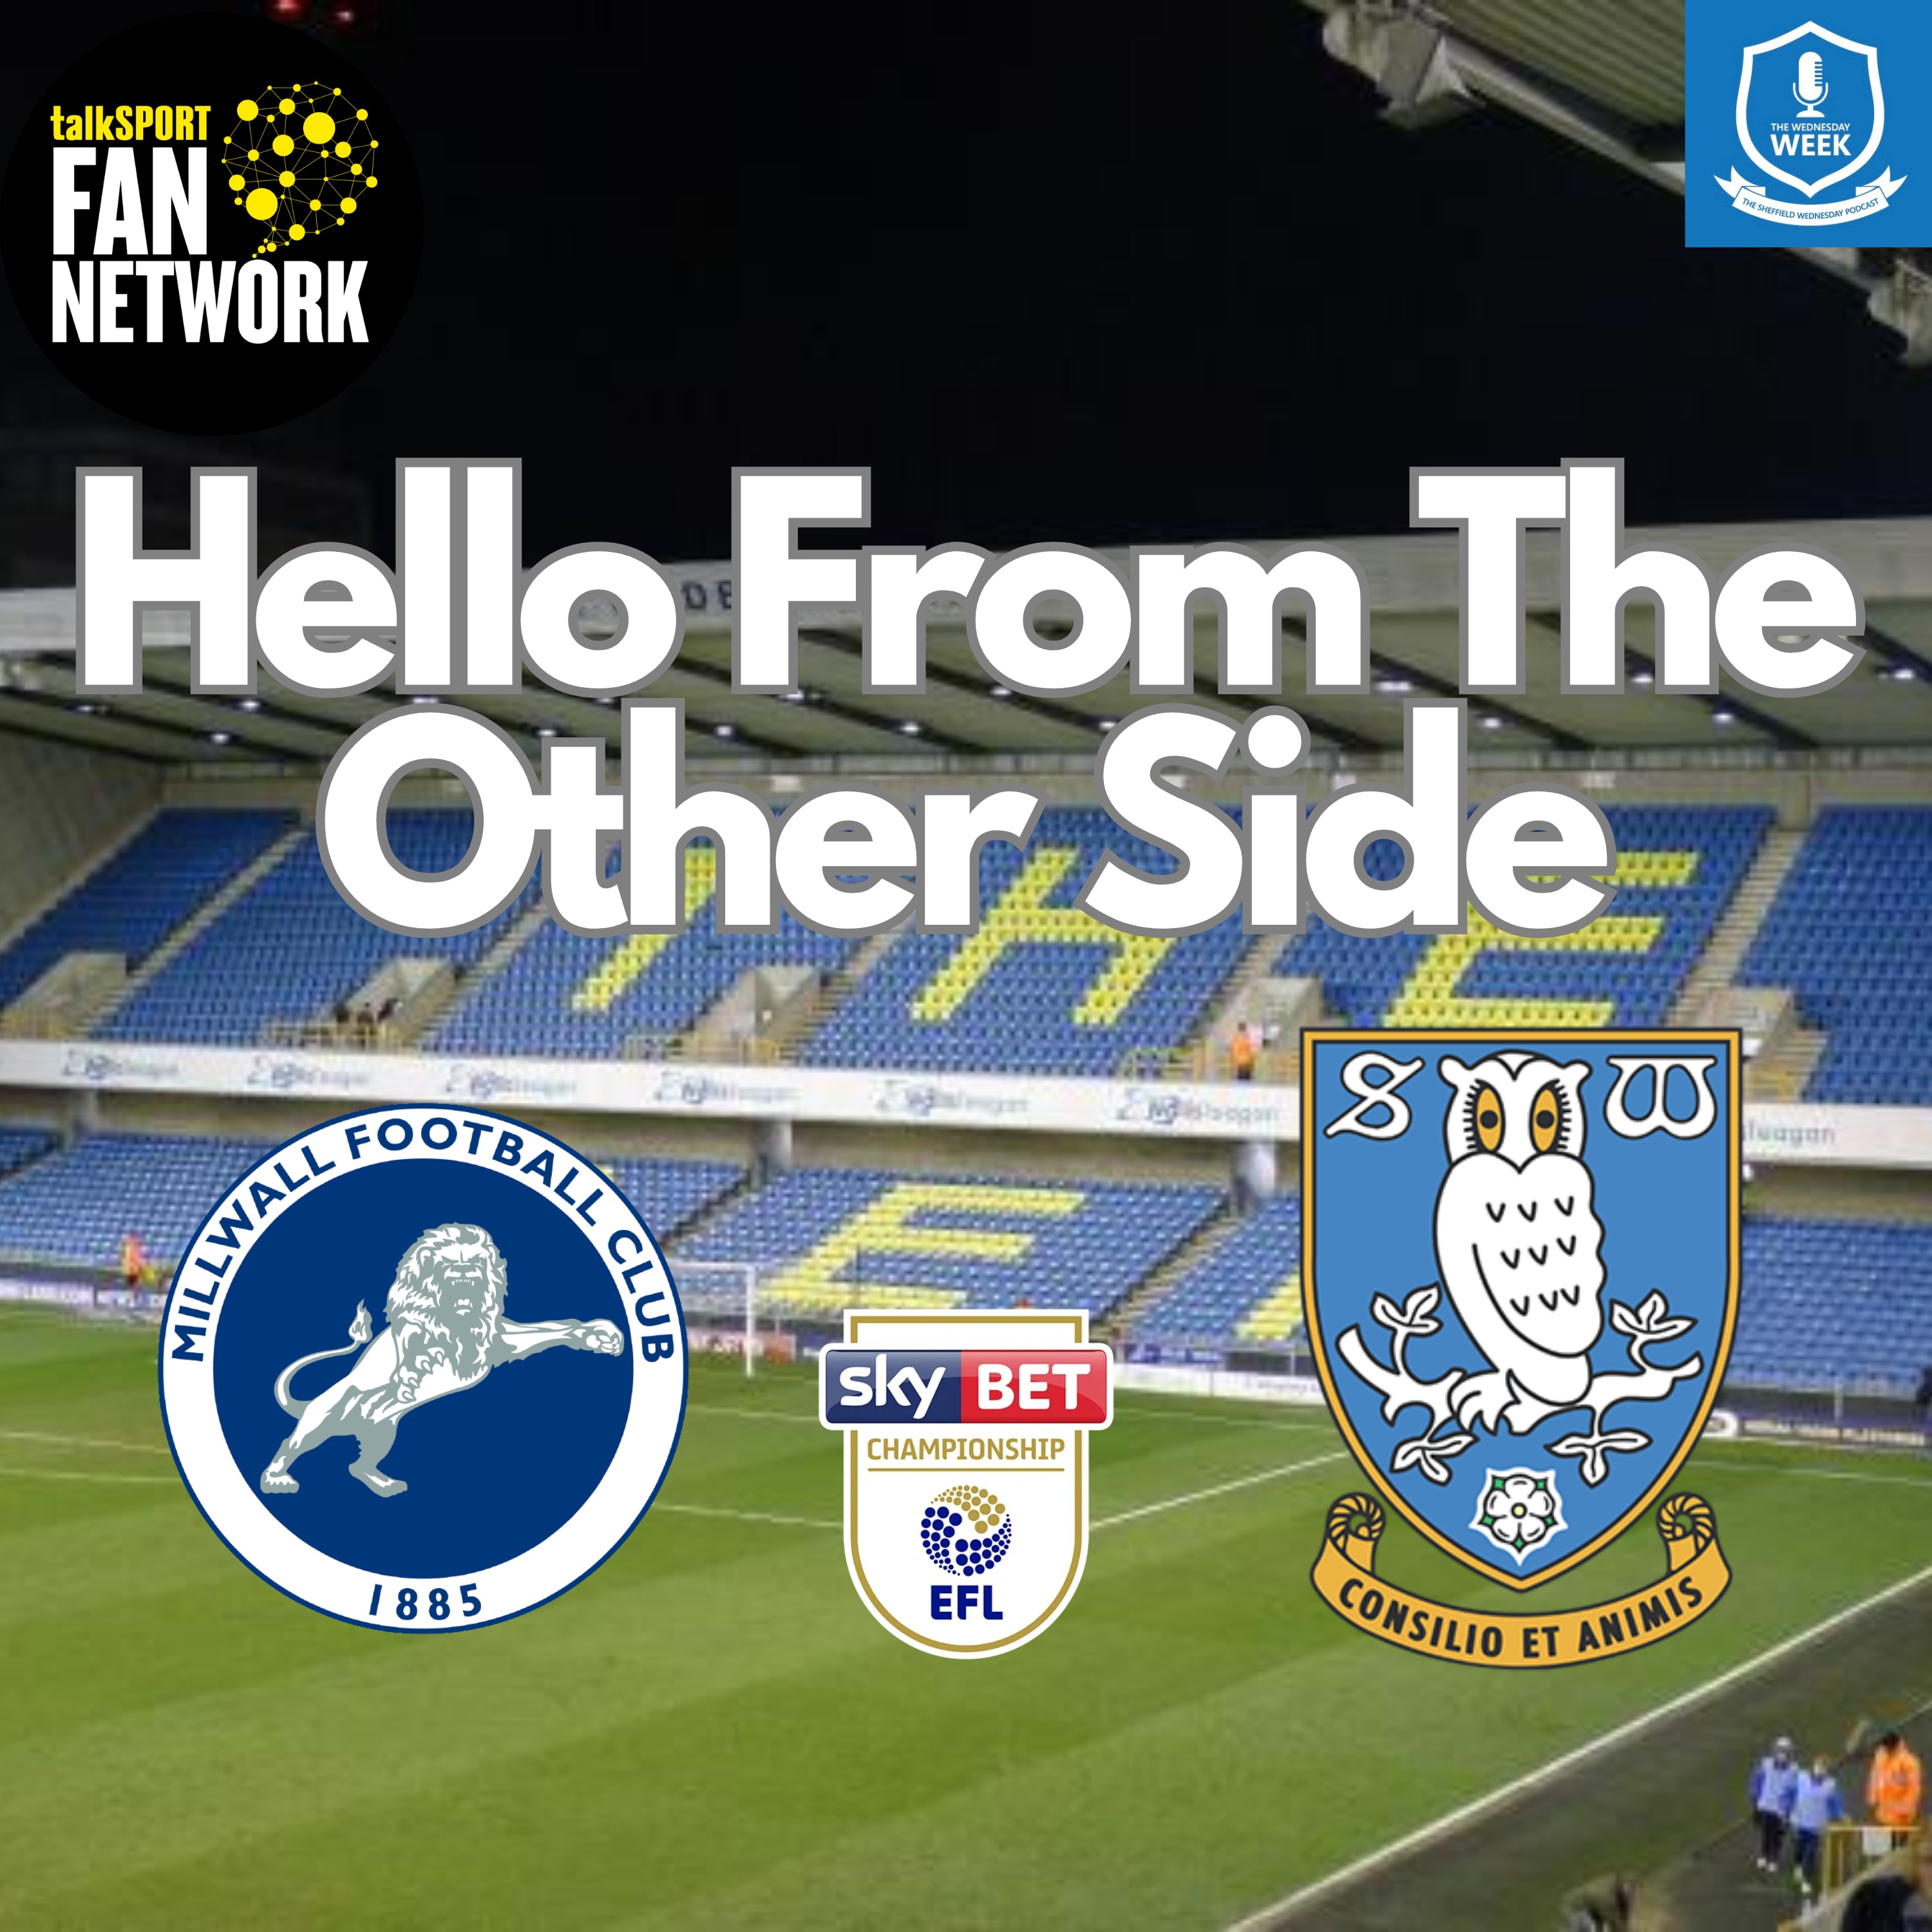 Hello From the Other Side - Millwall FC